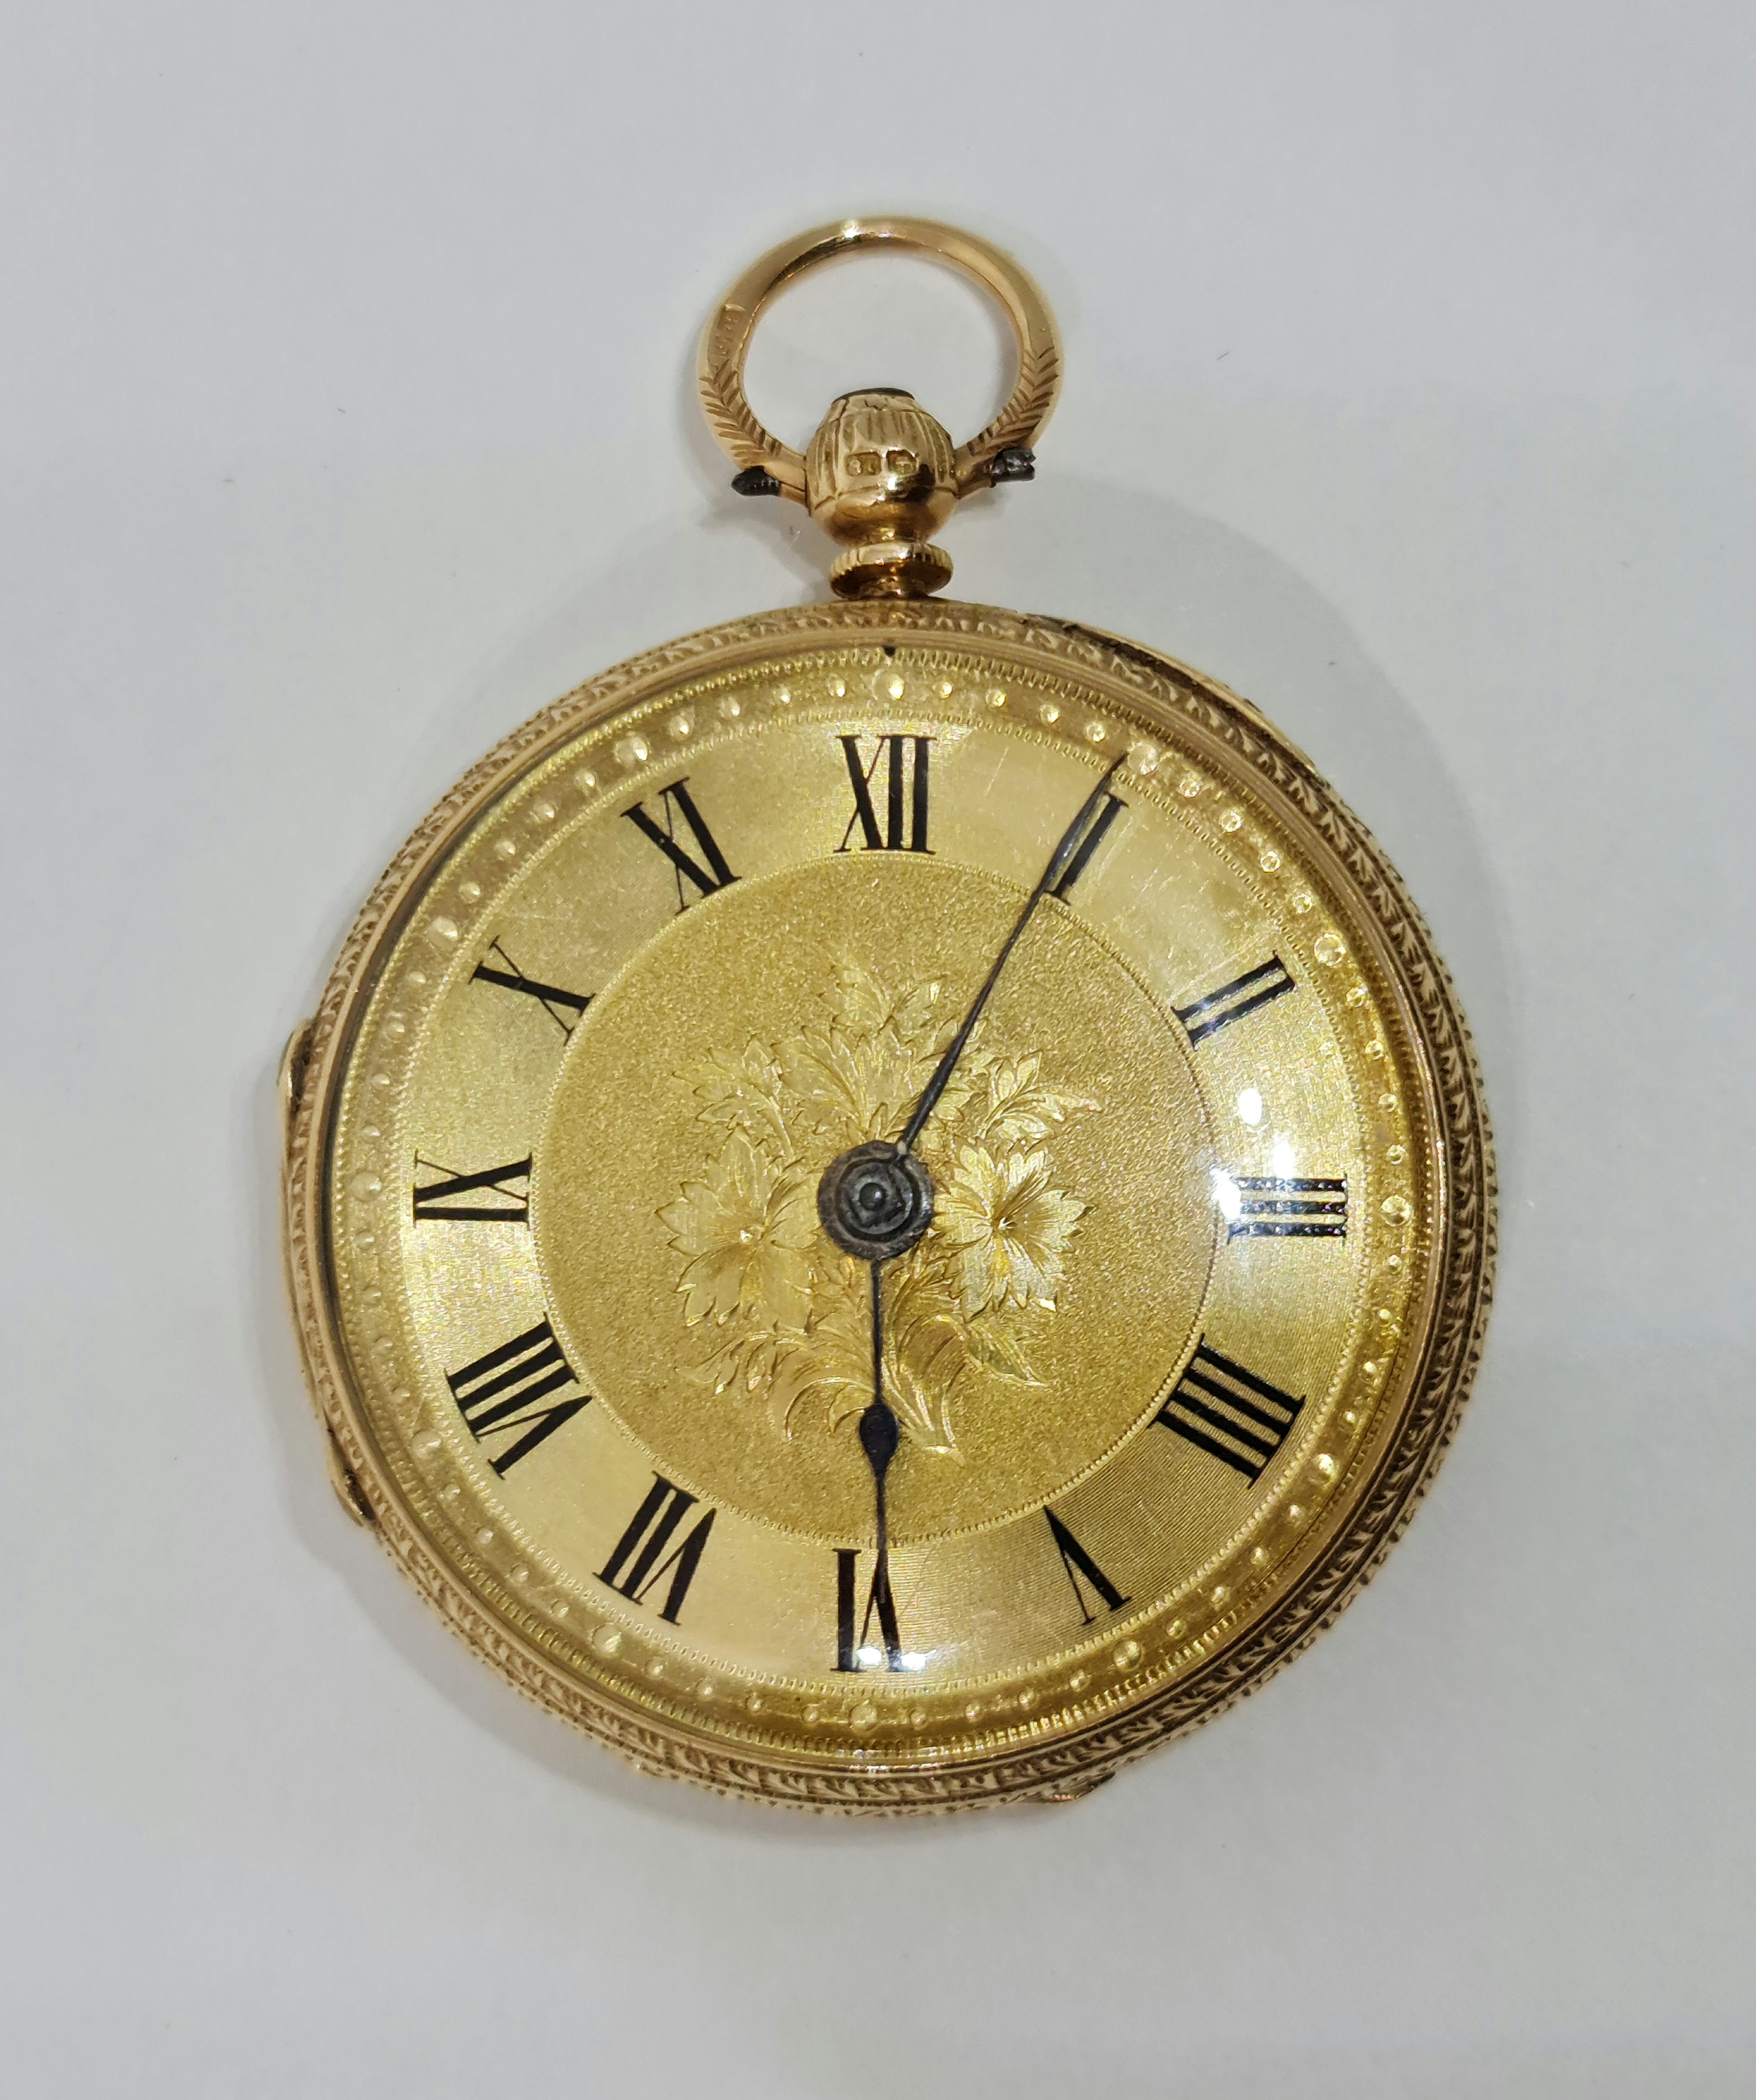 An 18ct yellow gold fob watch, the gold-tone dial having hourly Roman numeral markers with minute